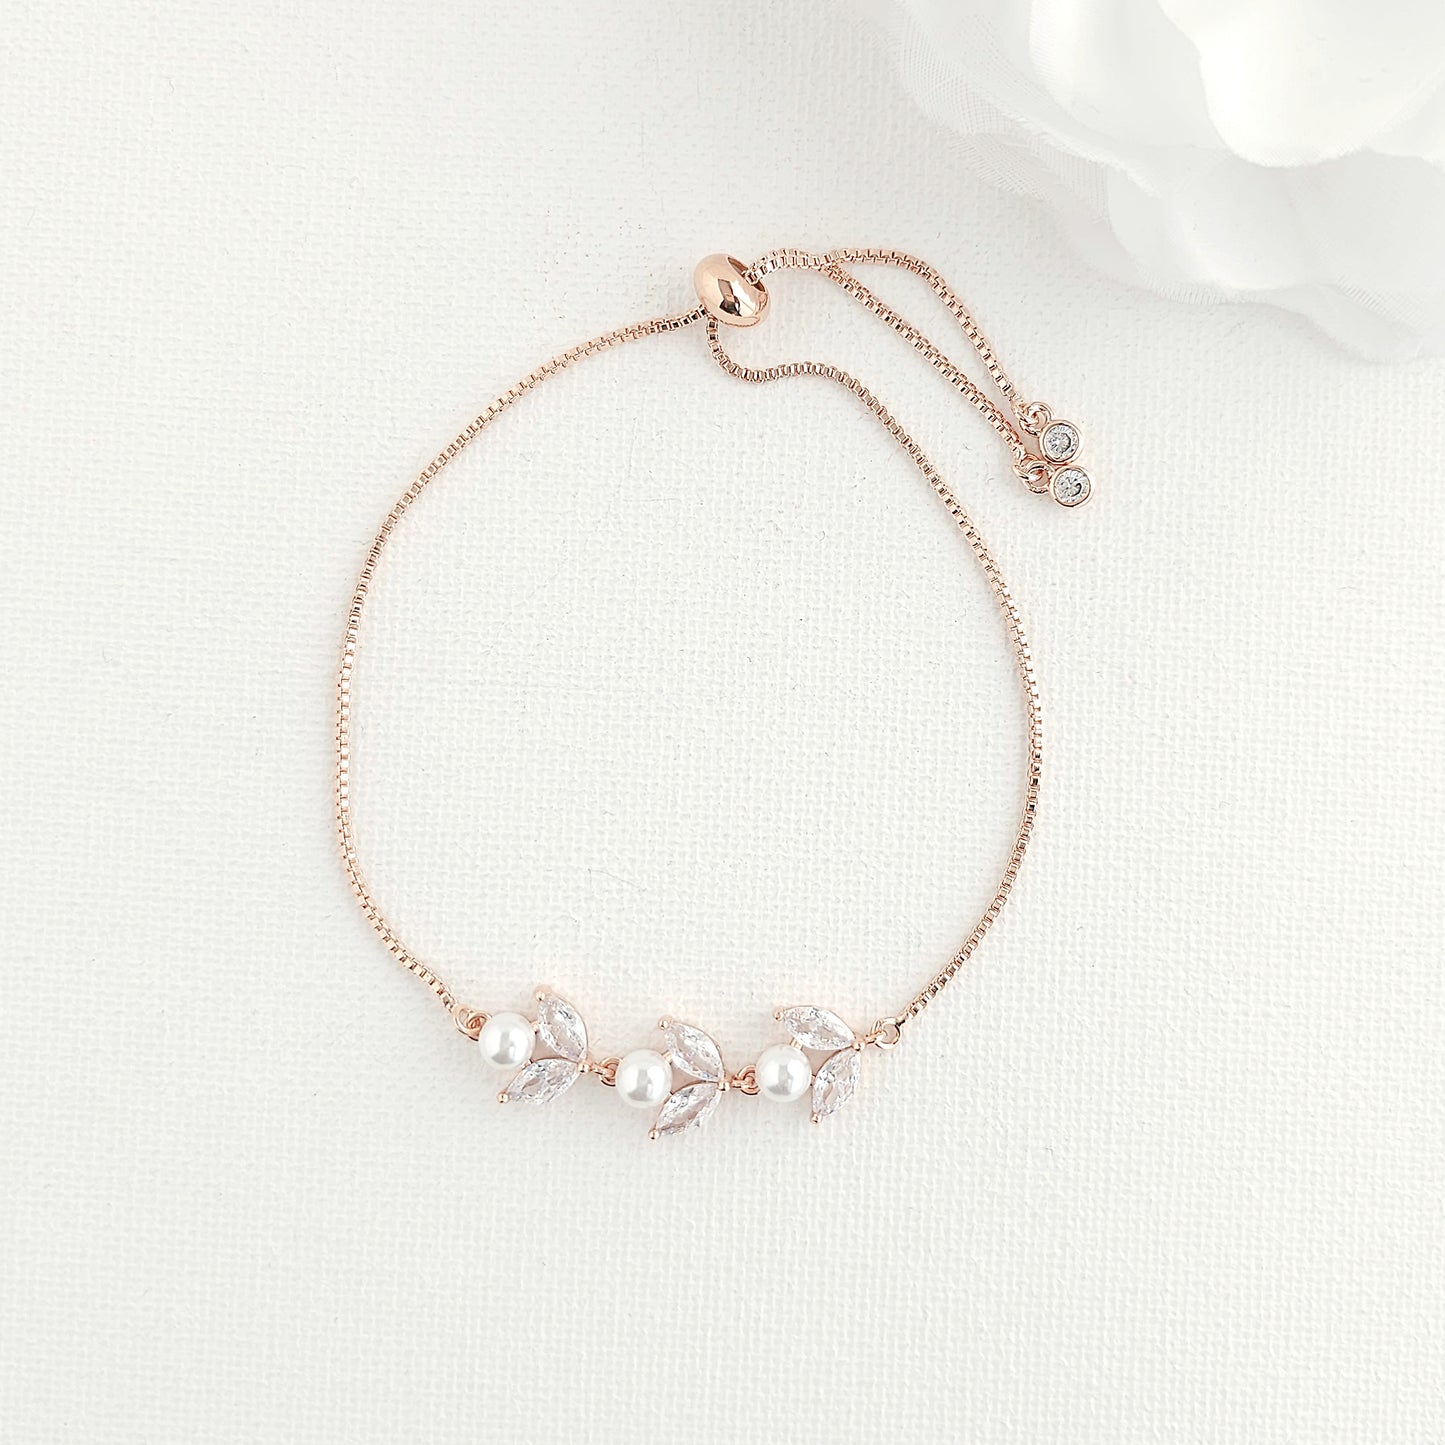 Dainty Rose Gold Bracelet for Brides and Bridemaids-Leila